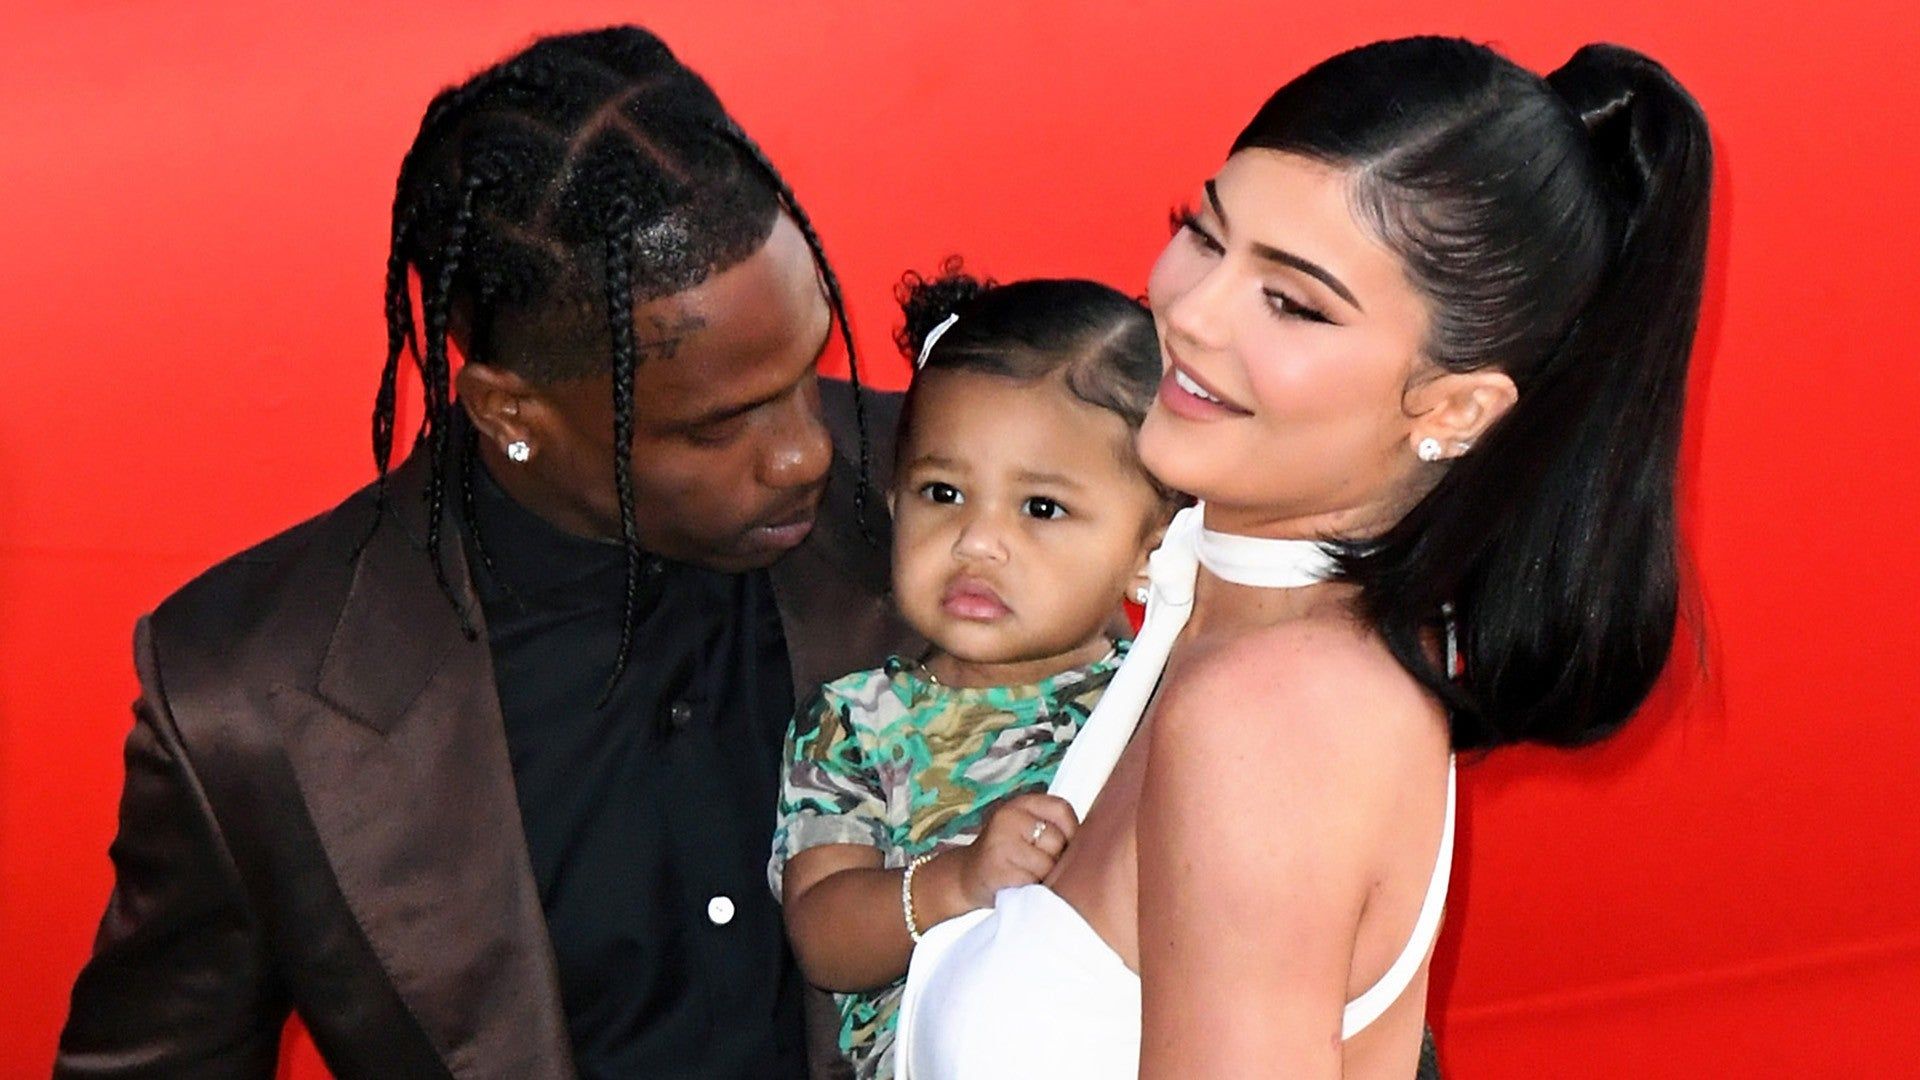 Travis Scott & Kylie Jenner Pack on the PDA While Posing for Family Pics With Stormi at Netflix Premiere